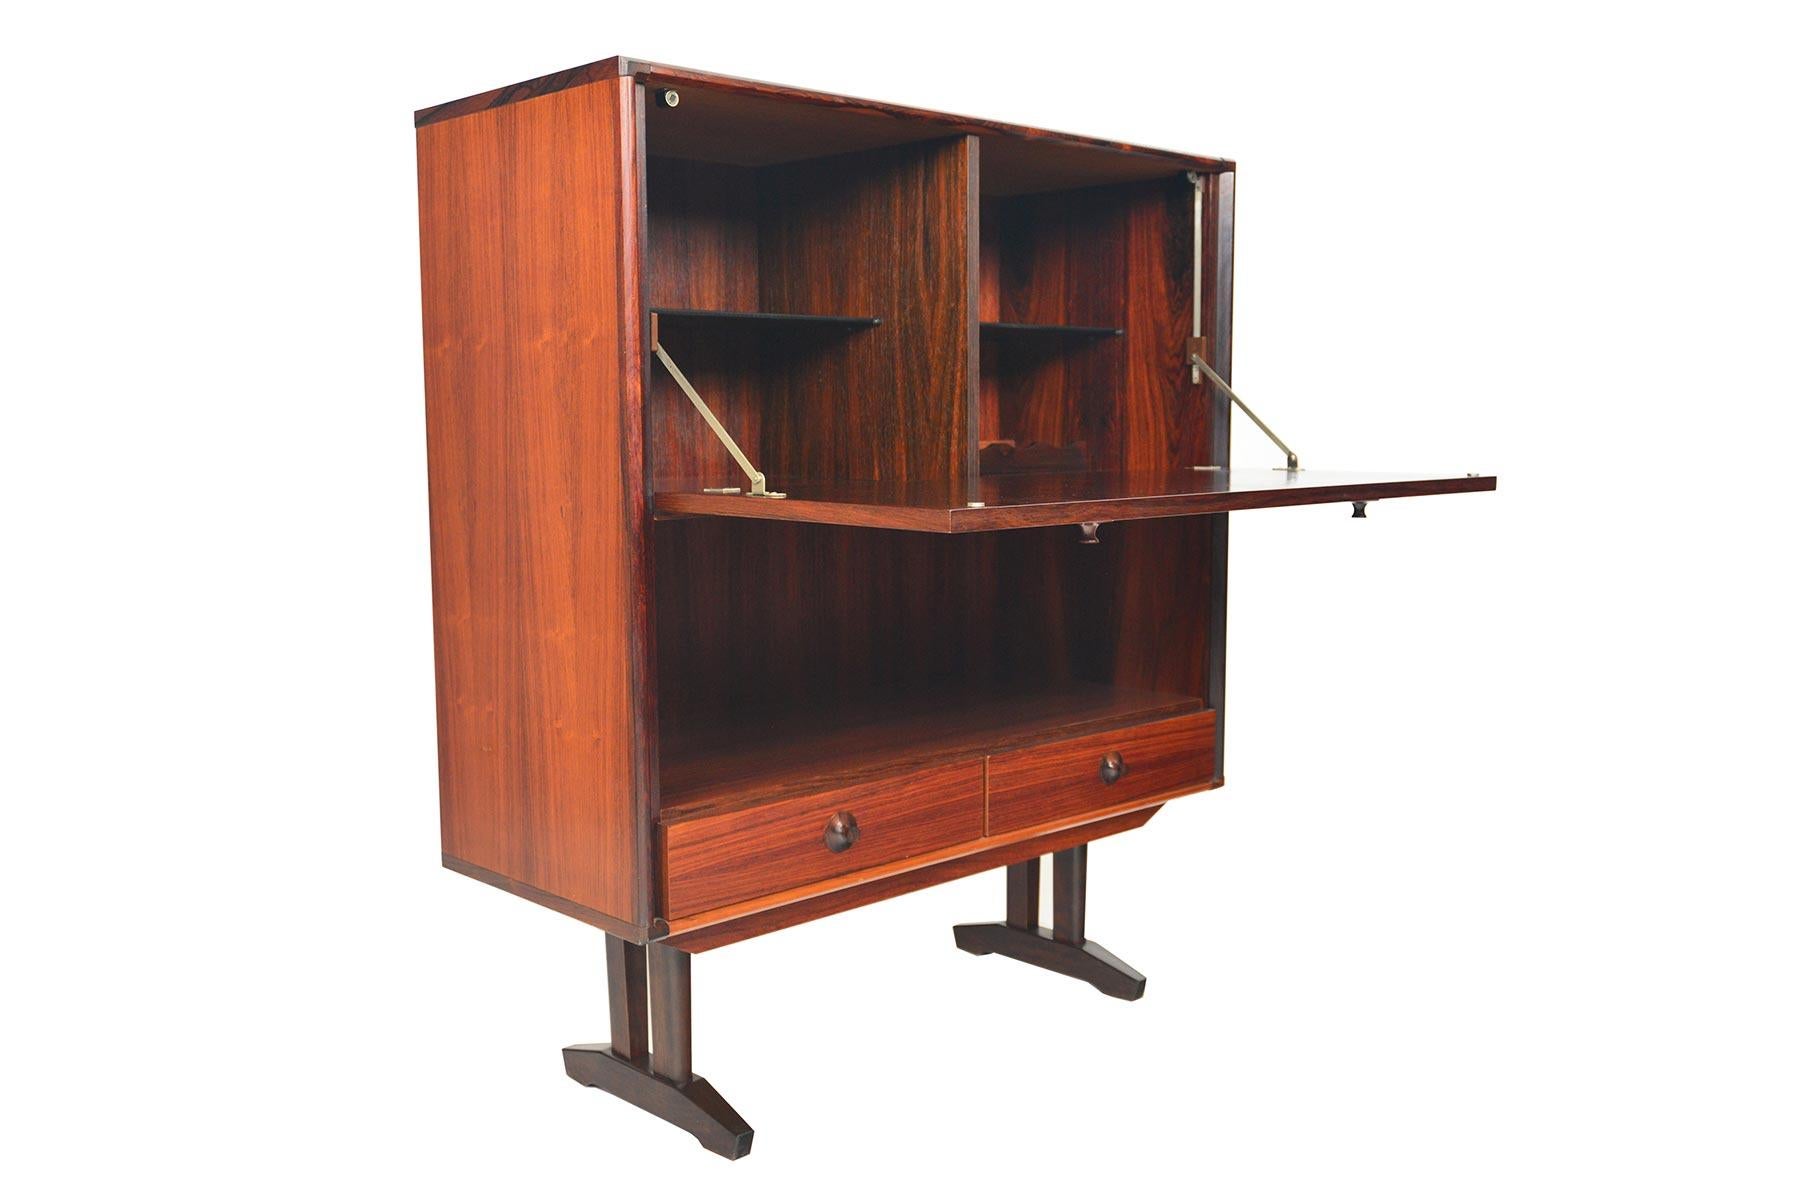 Beautifully cased in Brazilian rosewood, this tall bar was manufactured in Denmark in the late 1960s. A large door with two carved pulls lowers to reveal two bays with black glass shelves and a removable bottle rack. A lower cubby and two lower